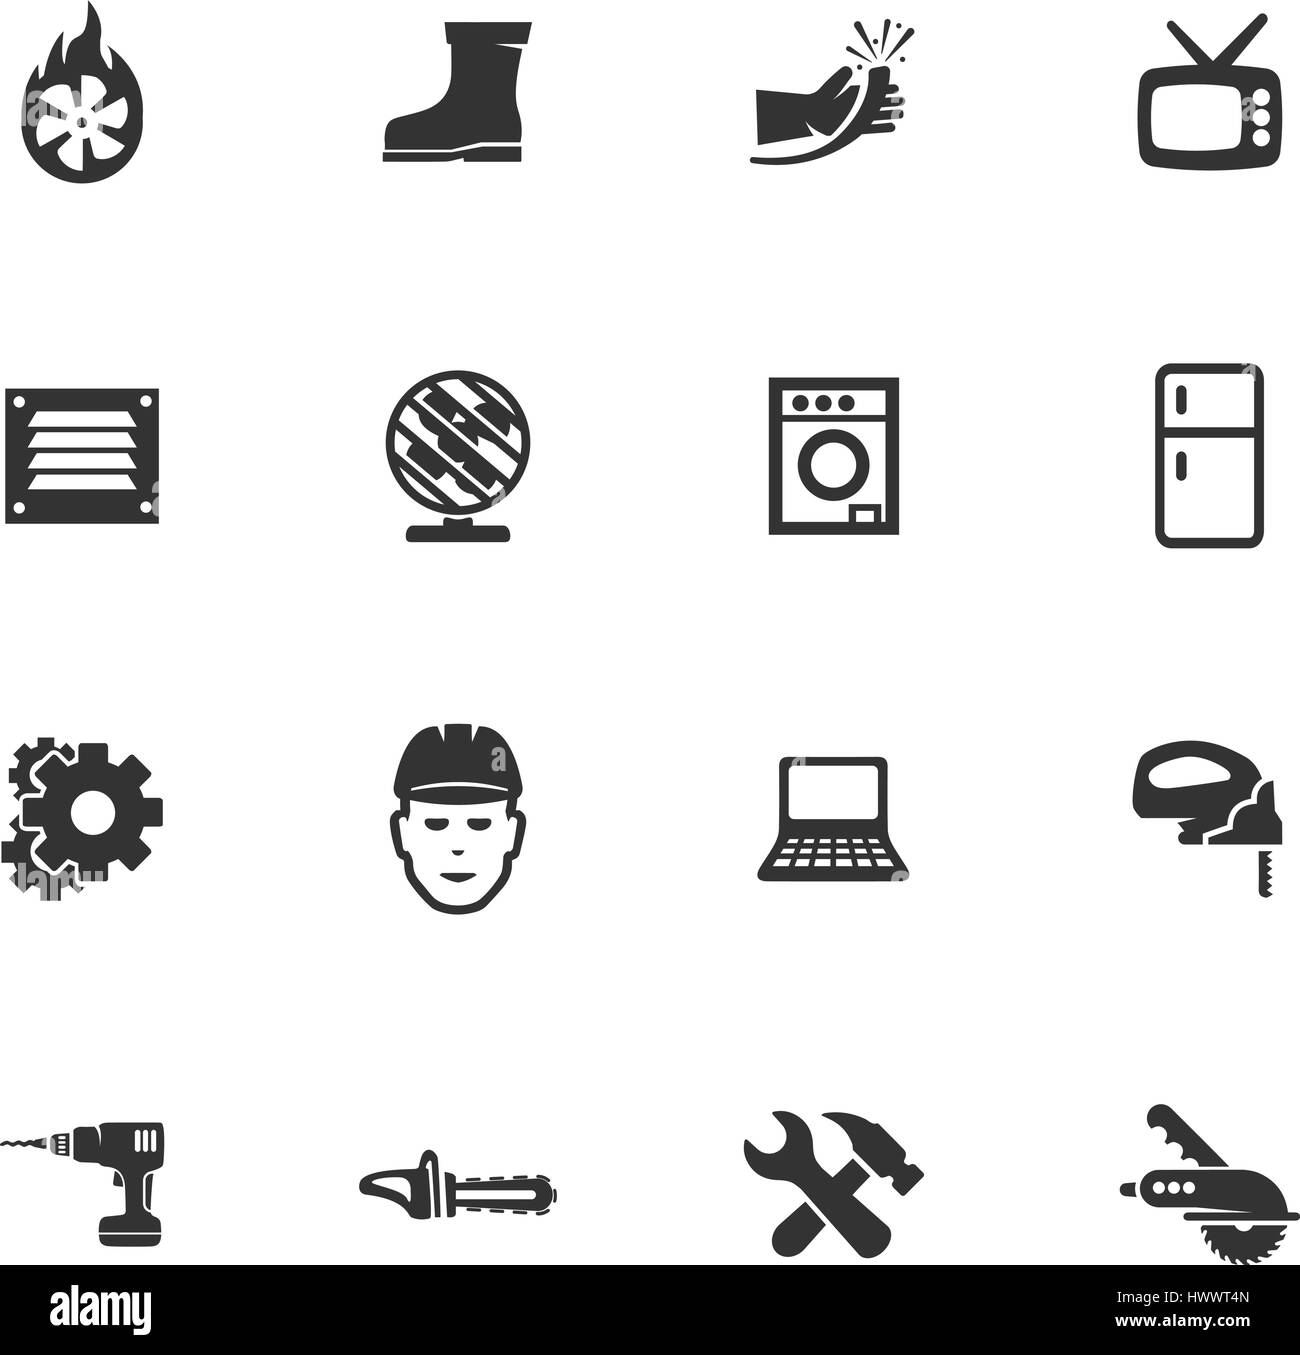 Electronics repair vector icons for user interface design Stock Vector